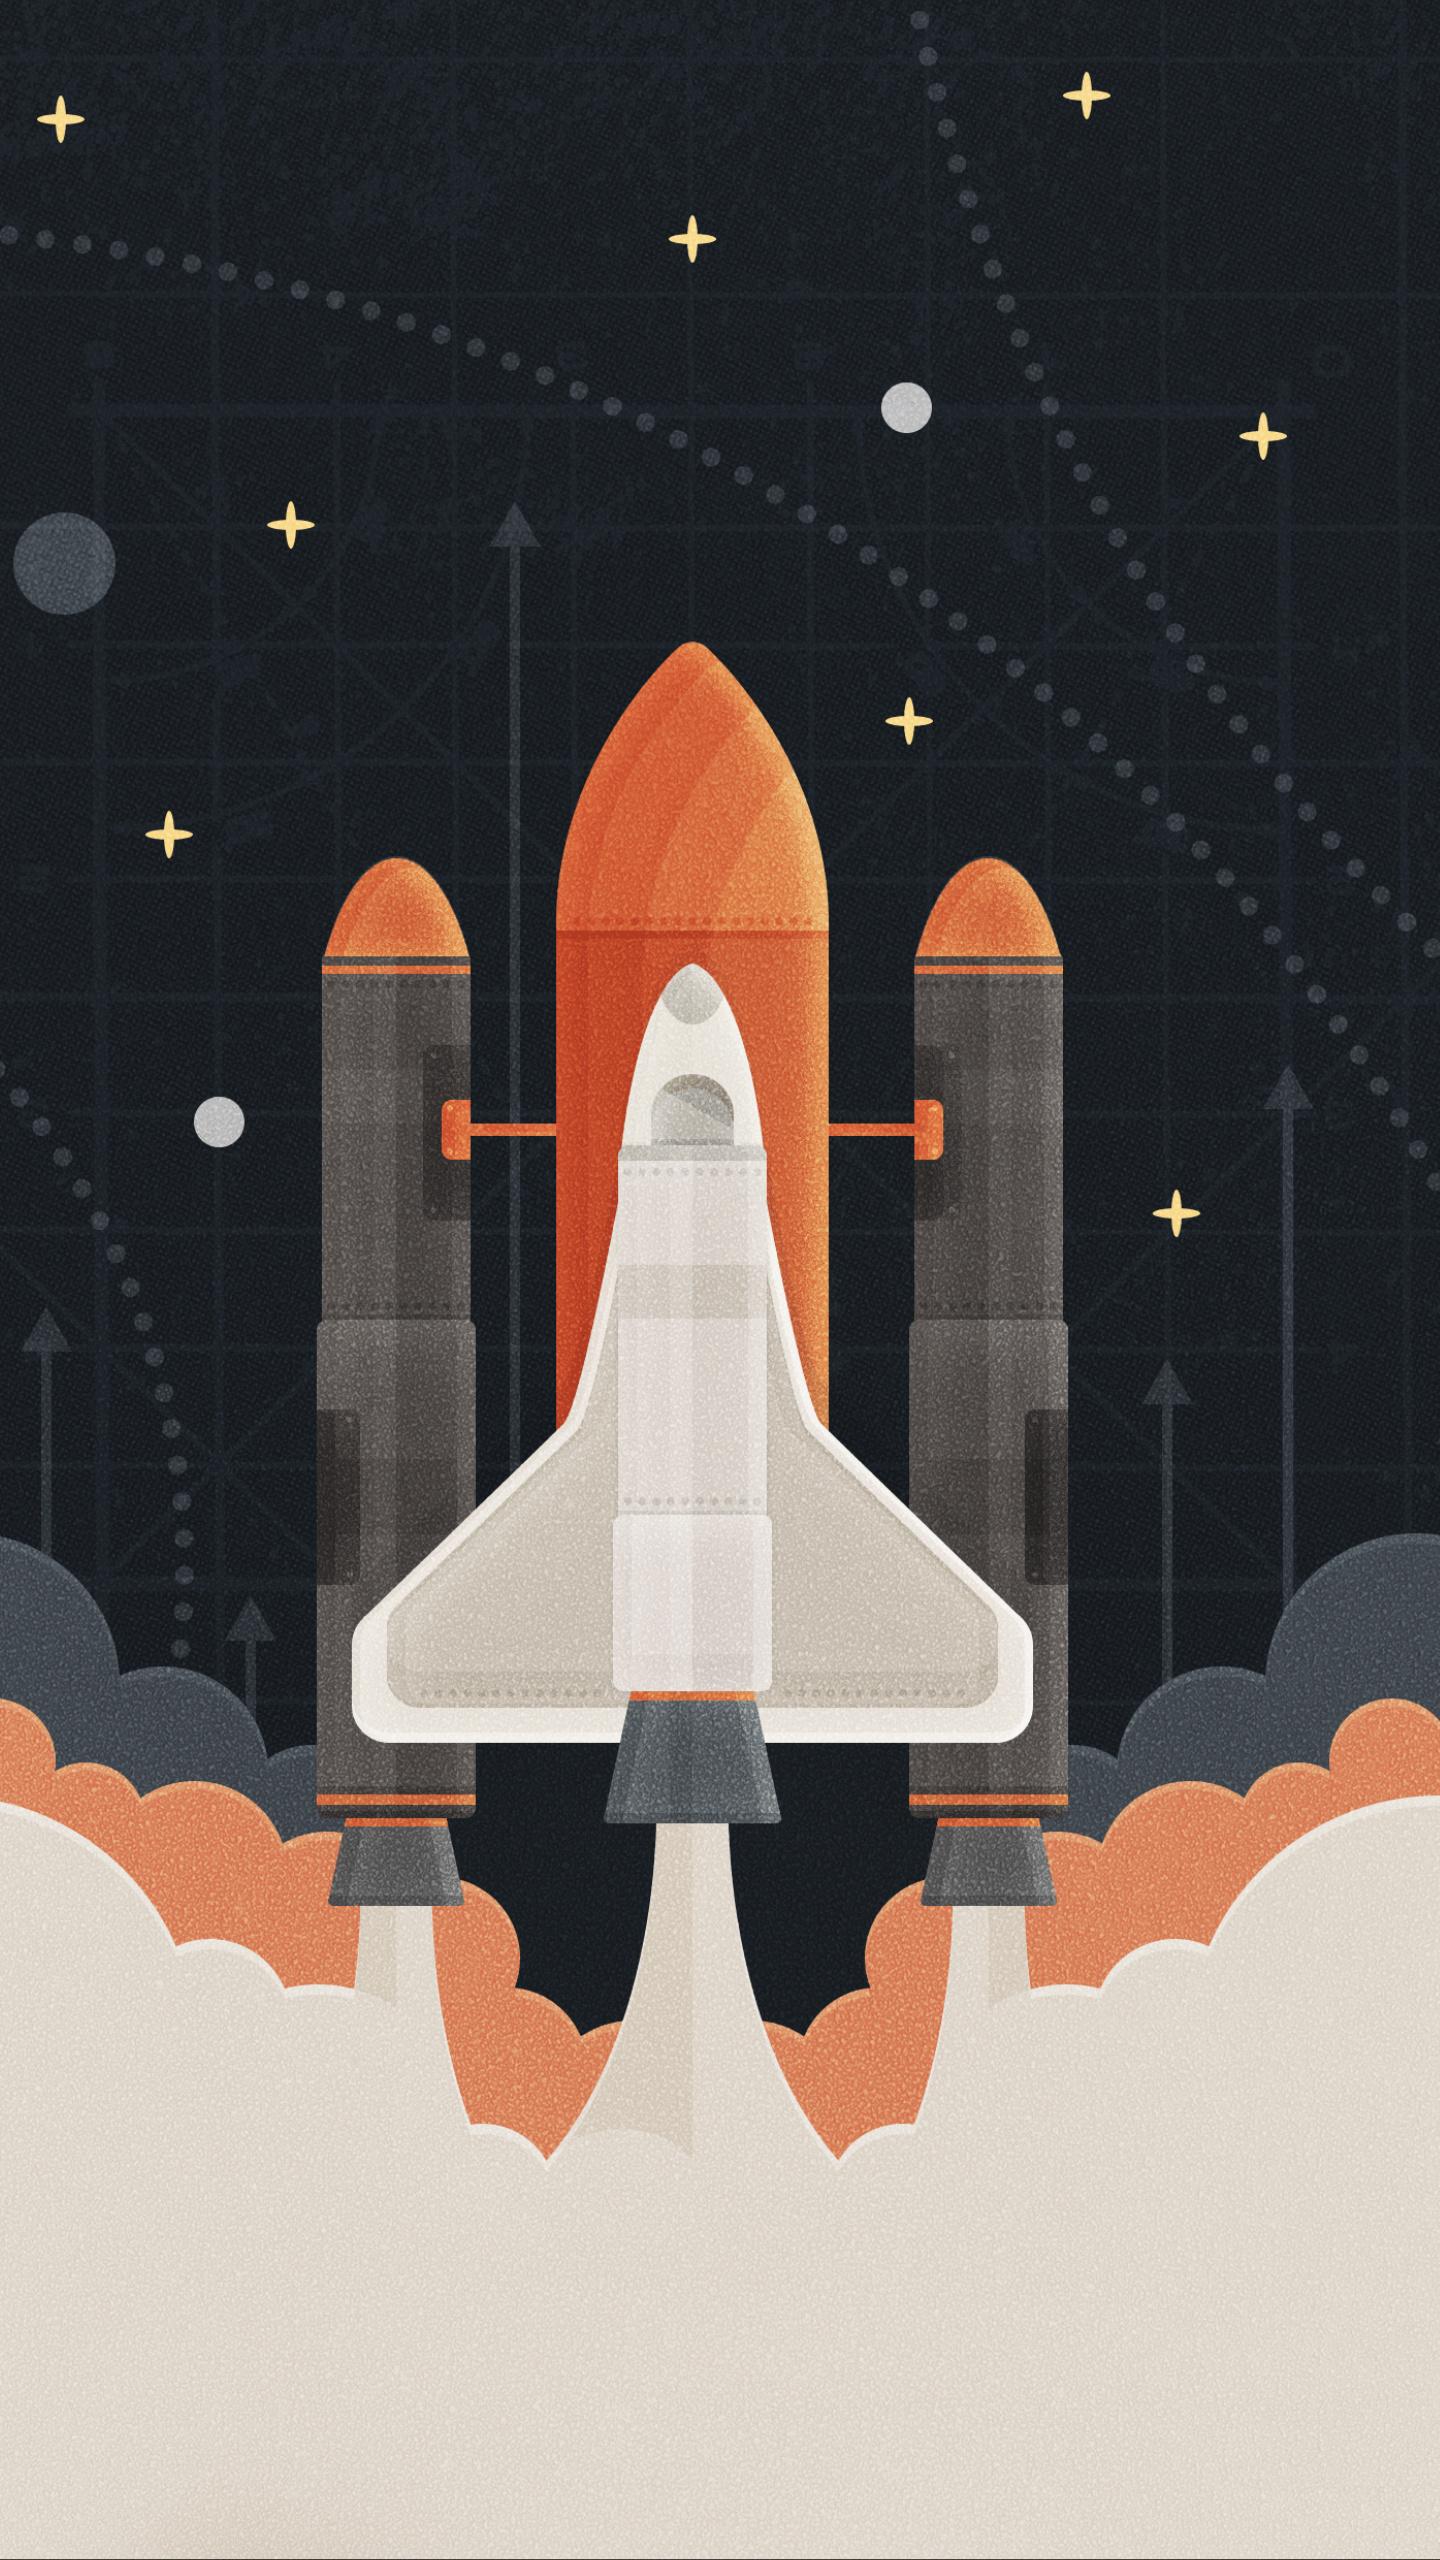 Space Shuttle Rocket Startup Concepts Minimalism Wallpapers